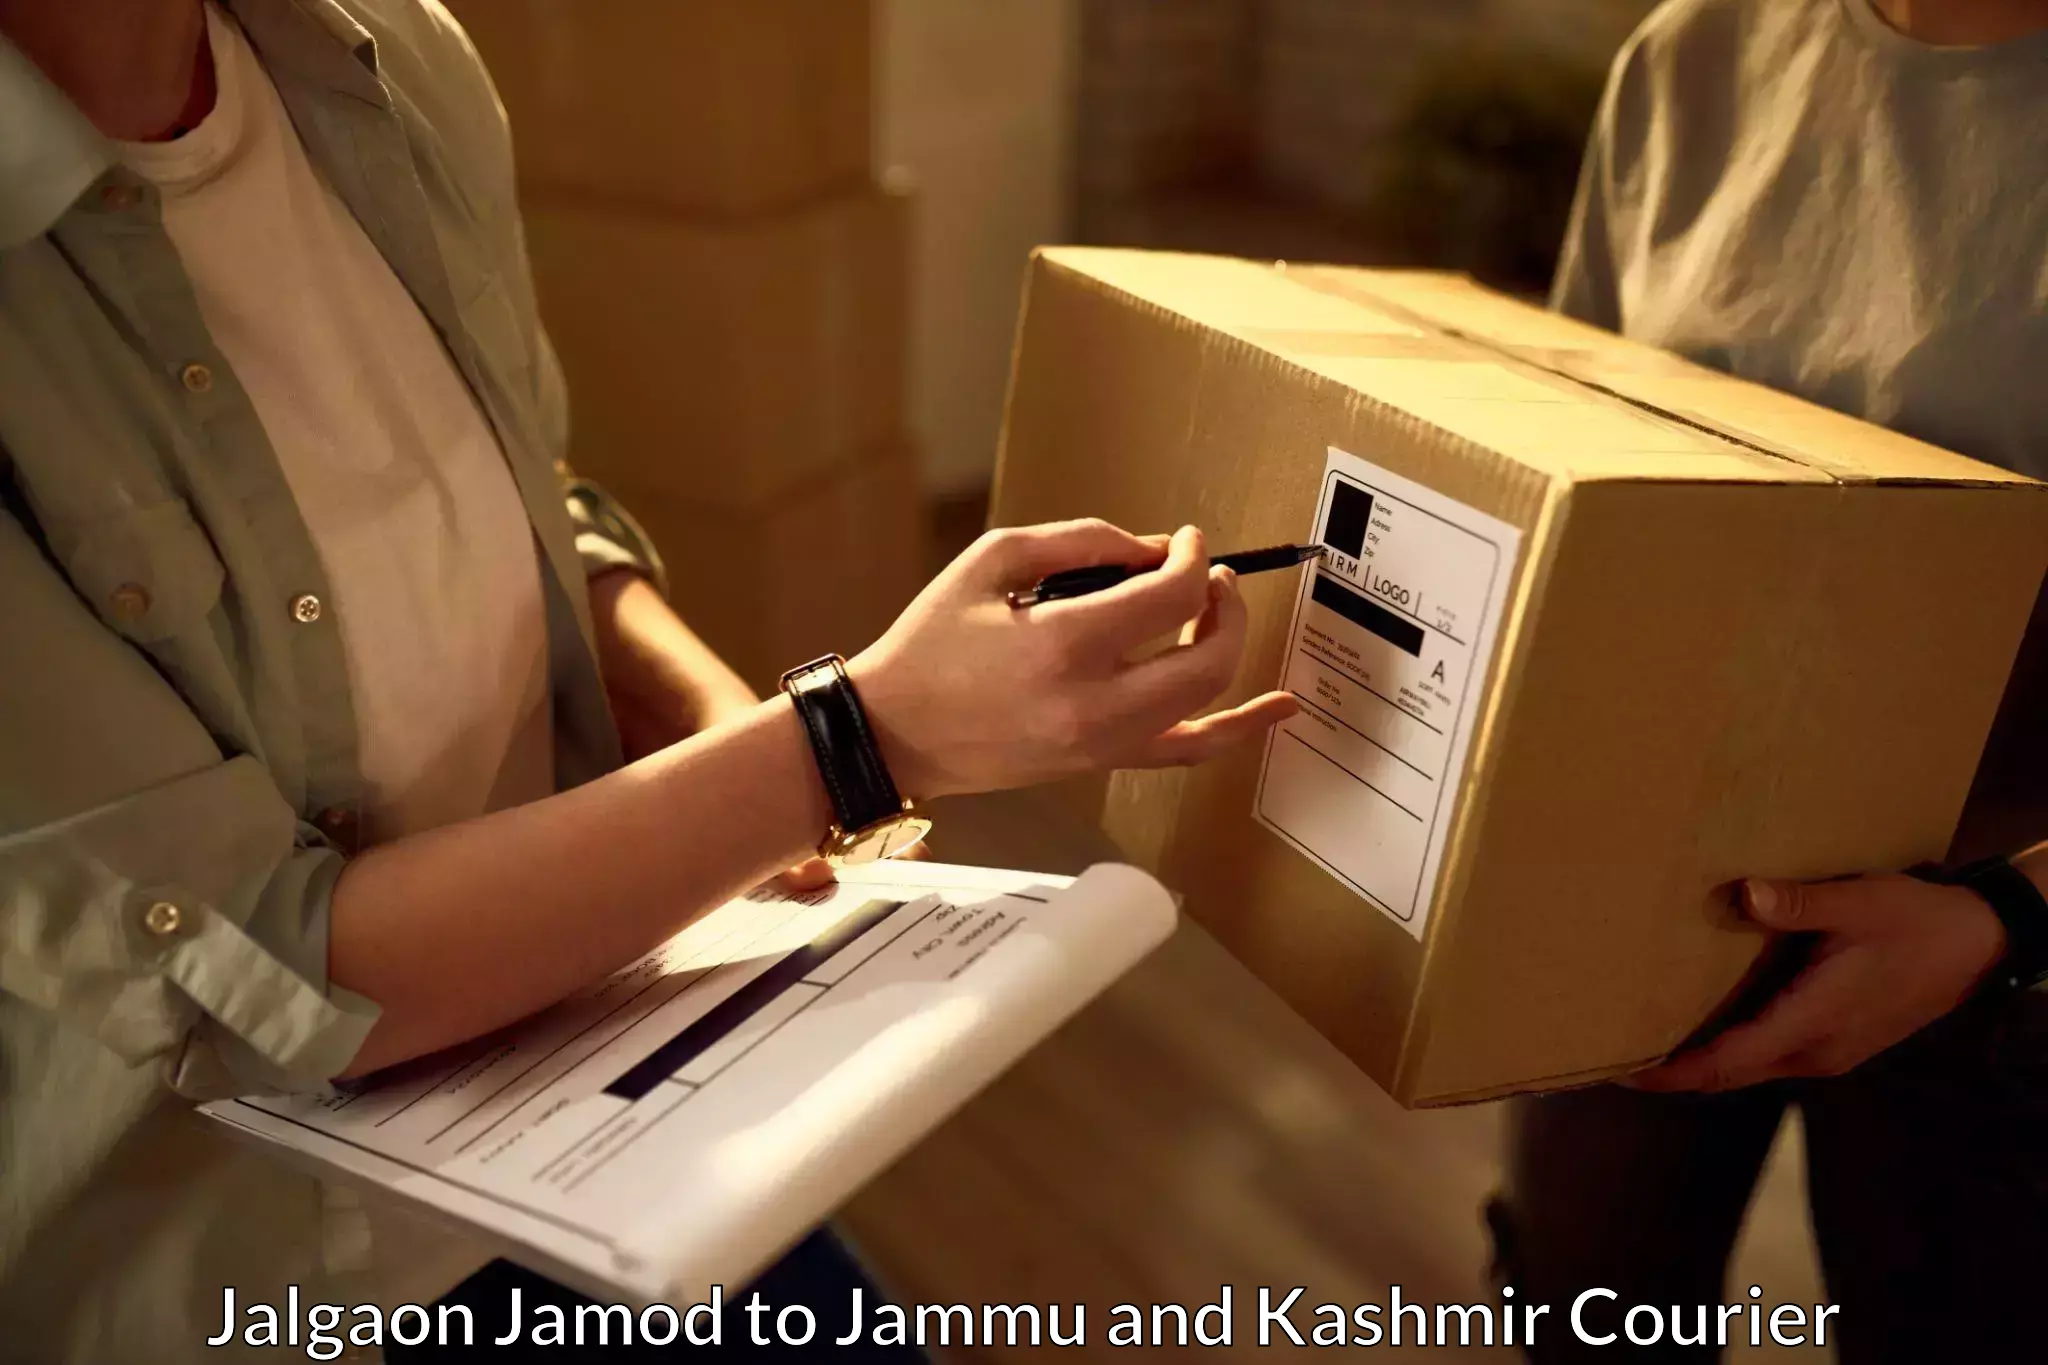 User-friendly delivery service Jalgaon Jamod to Udhampur